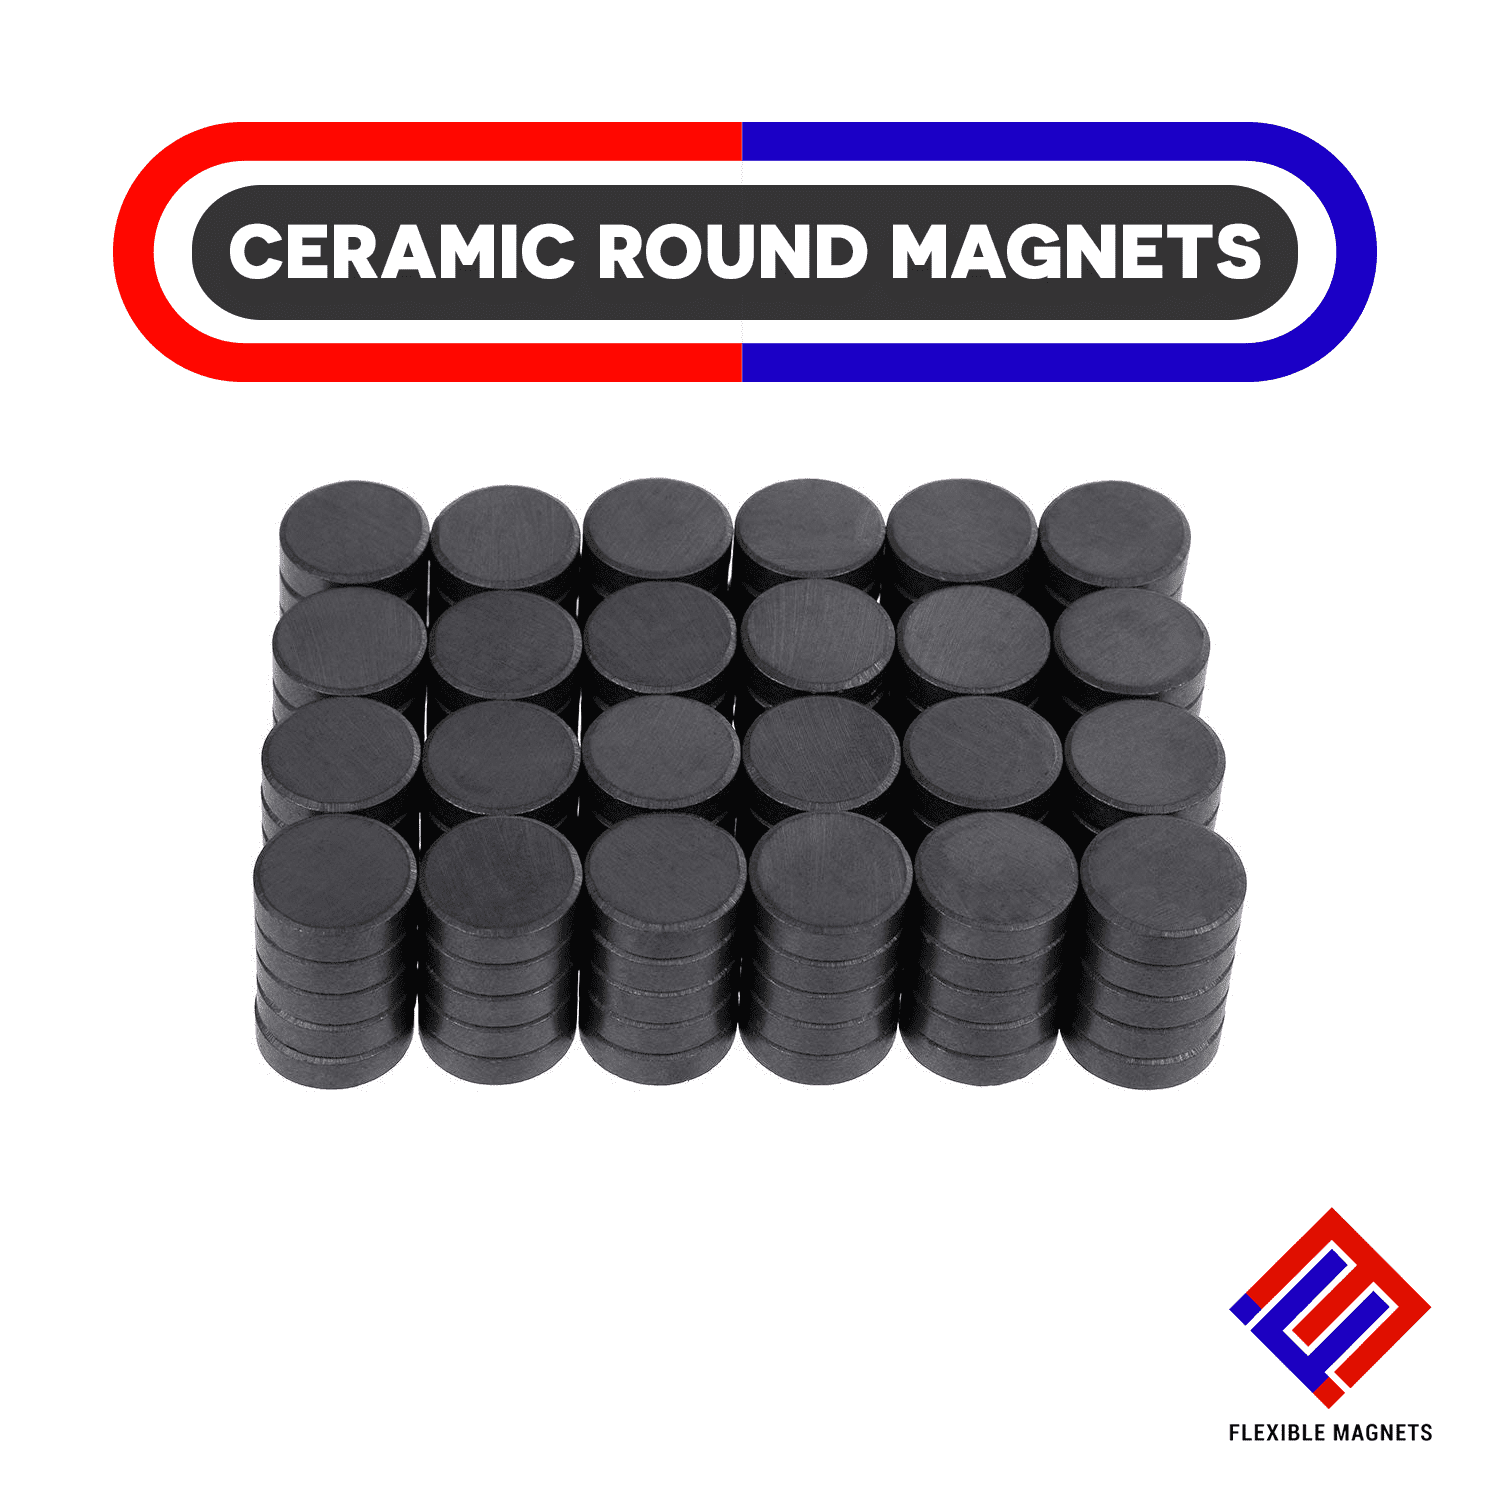 Details about   Bulk LOT 100 Ceramic Hard Magnet Round Disc 3/4x3/16" Crafting Science Free Ship 